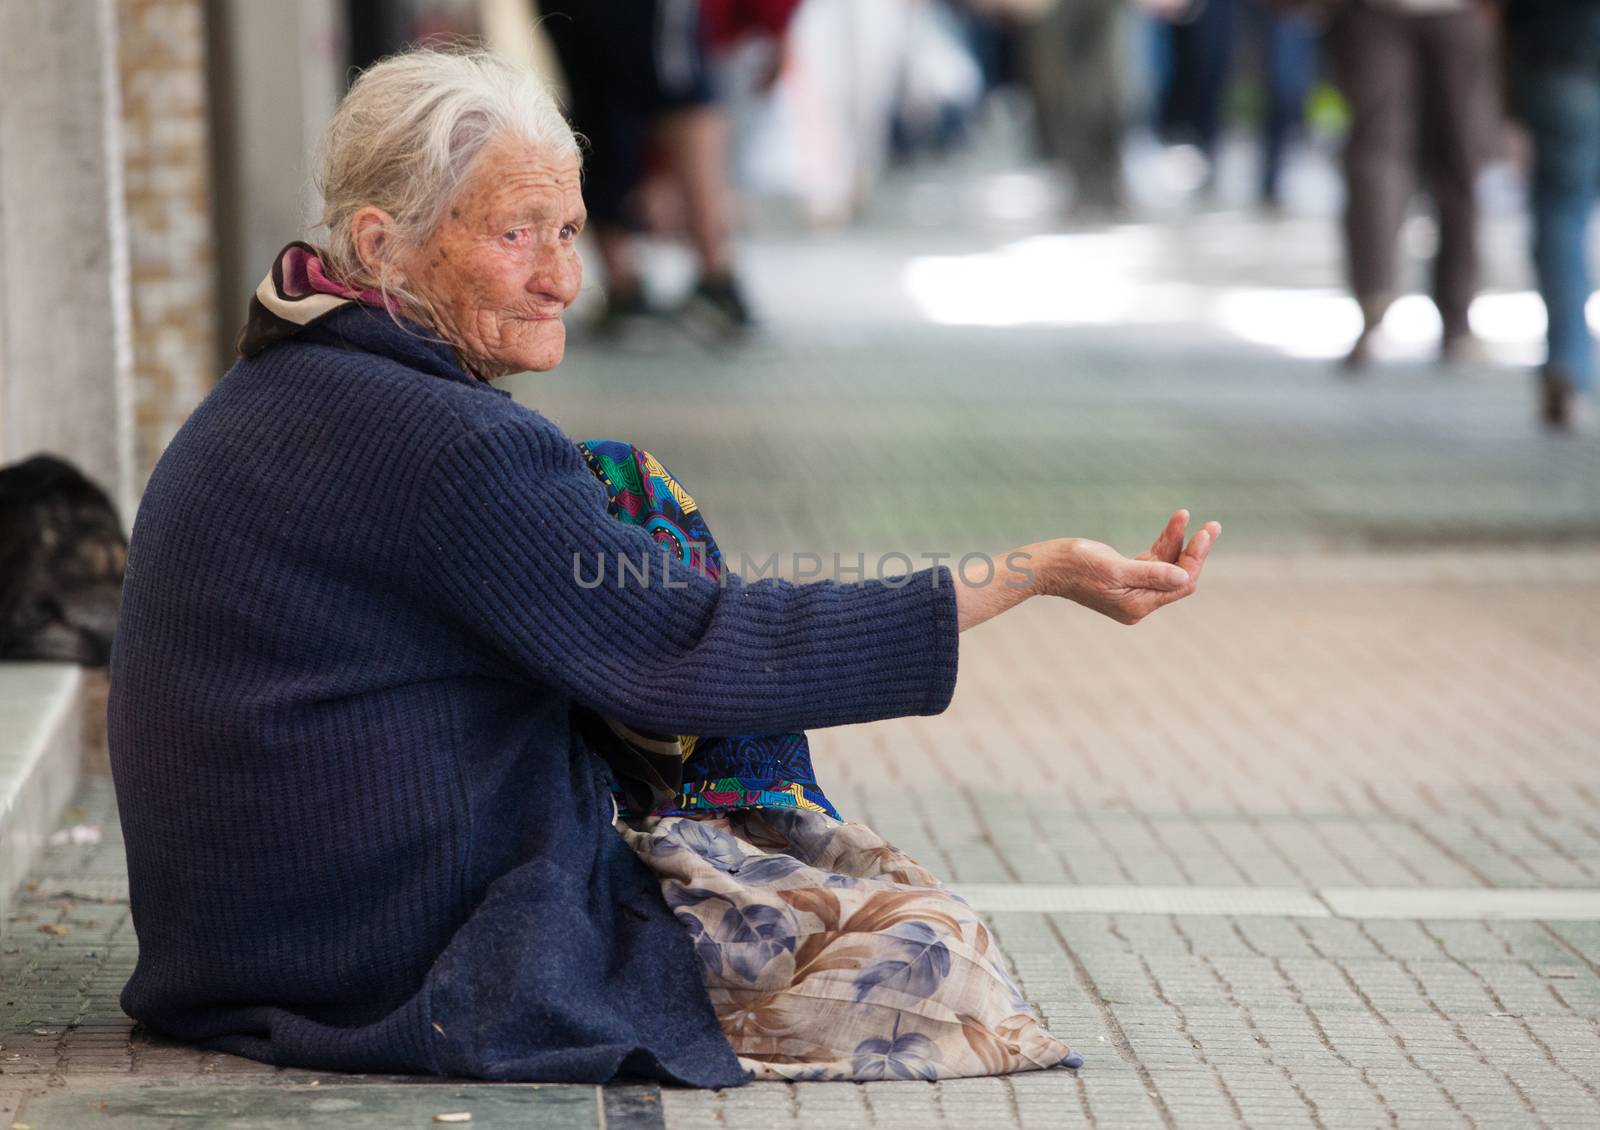 THESSALONIKI, GREECE - JUNE 28: The number of beggars in the city has increased dramatically. The economic crisis has hit the elderly on June 28, 2011 in Thessaloniki, Greece